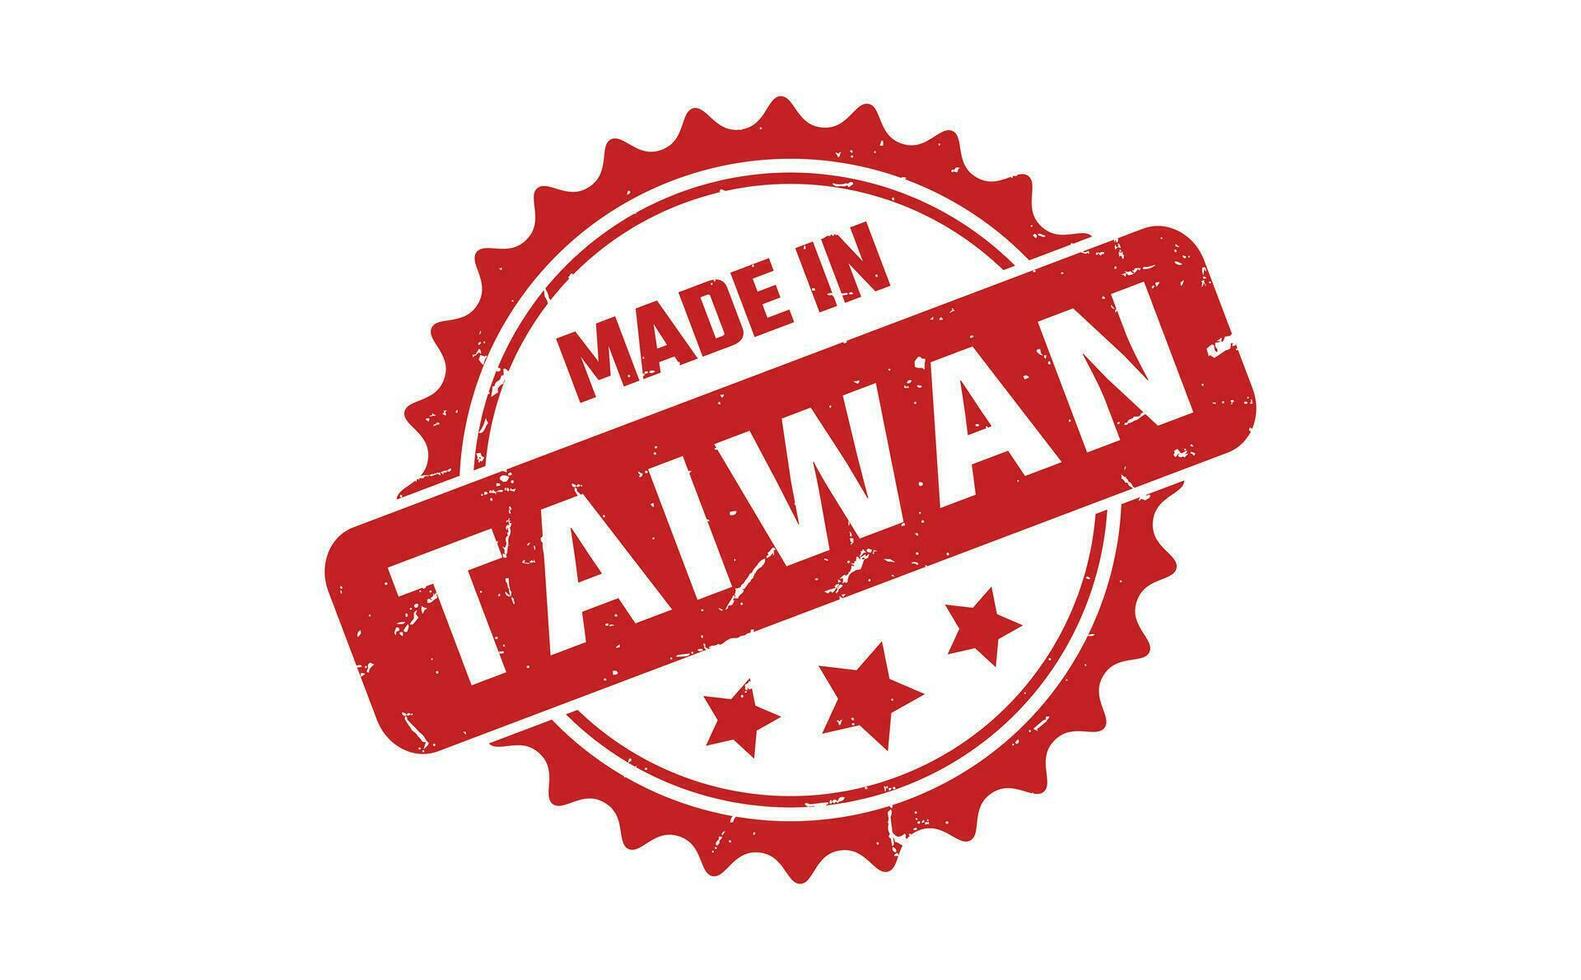 Made In Taiwan Rubber Stamp vector